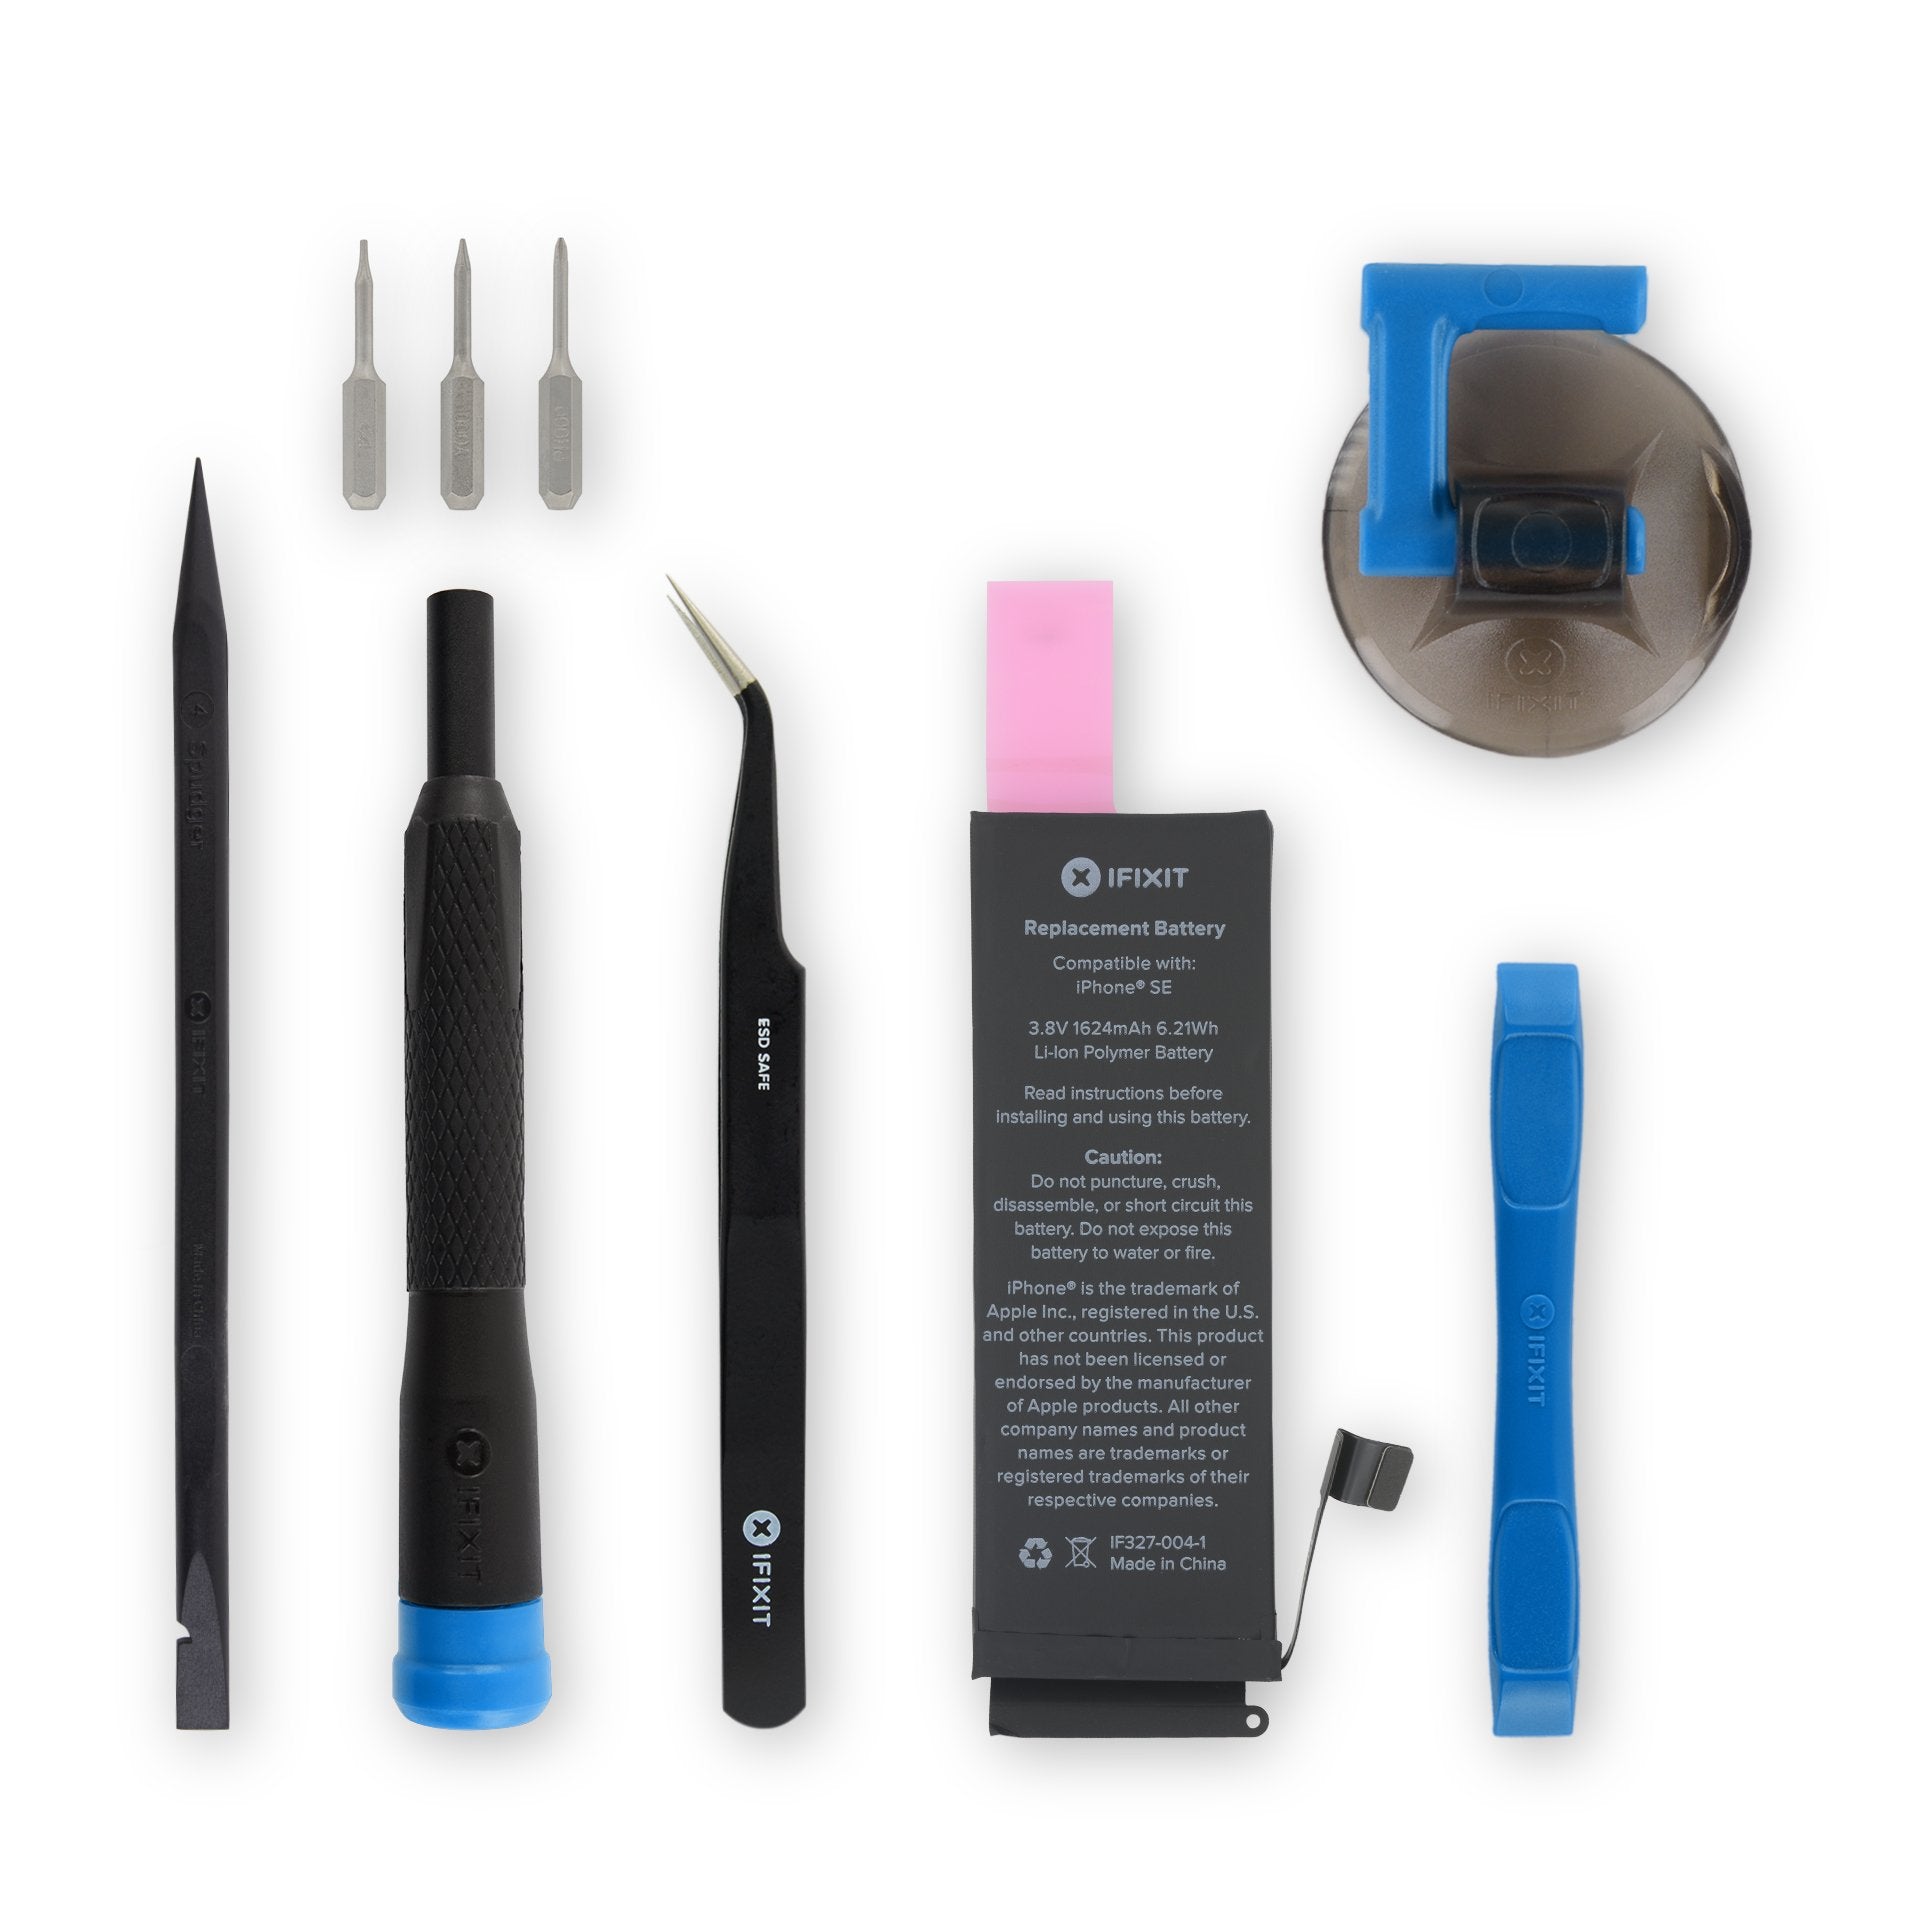 iPhone 4 Battery Replacement - iFixit Repair Guide